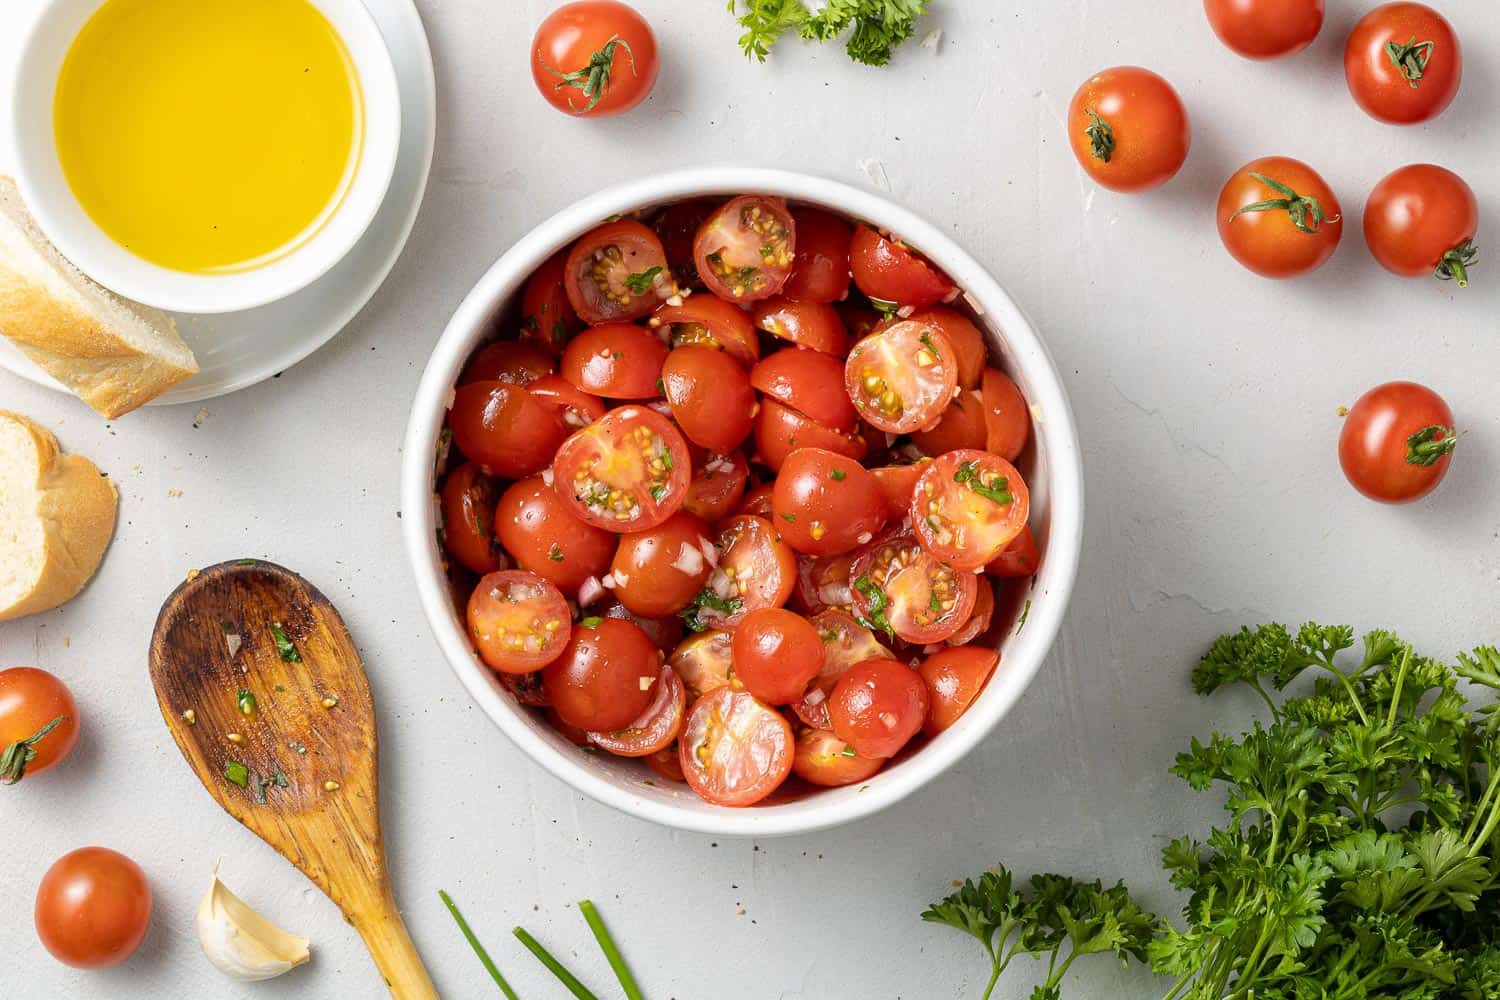 Tomatoes, surrounded with fresh herbs, oil, and a wooden spoon.